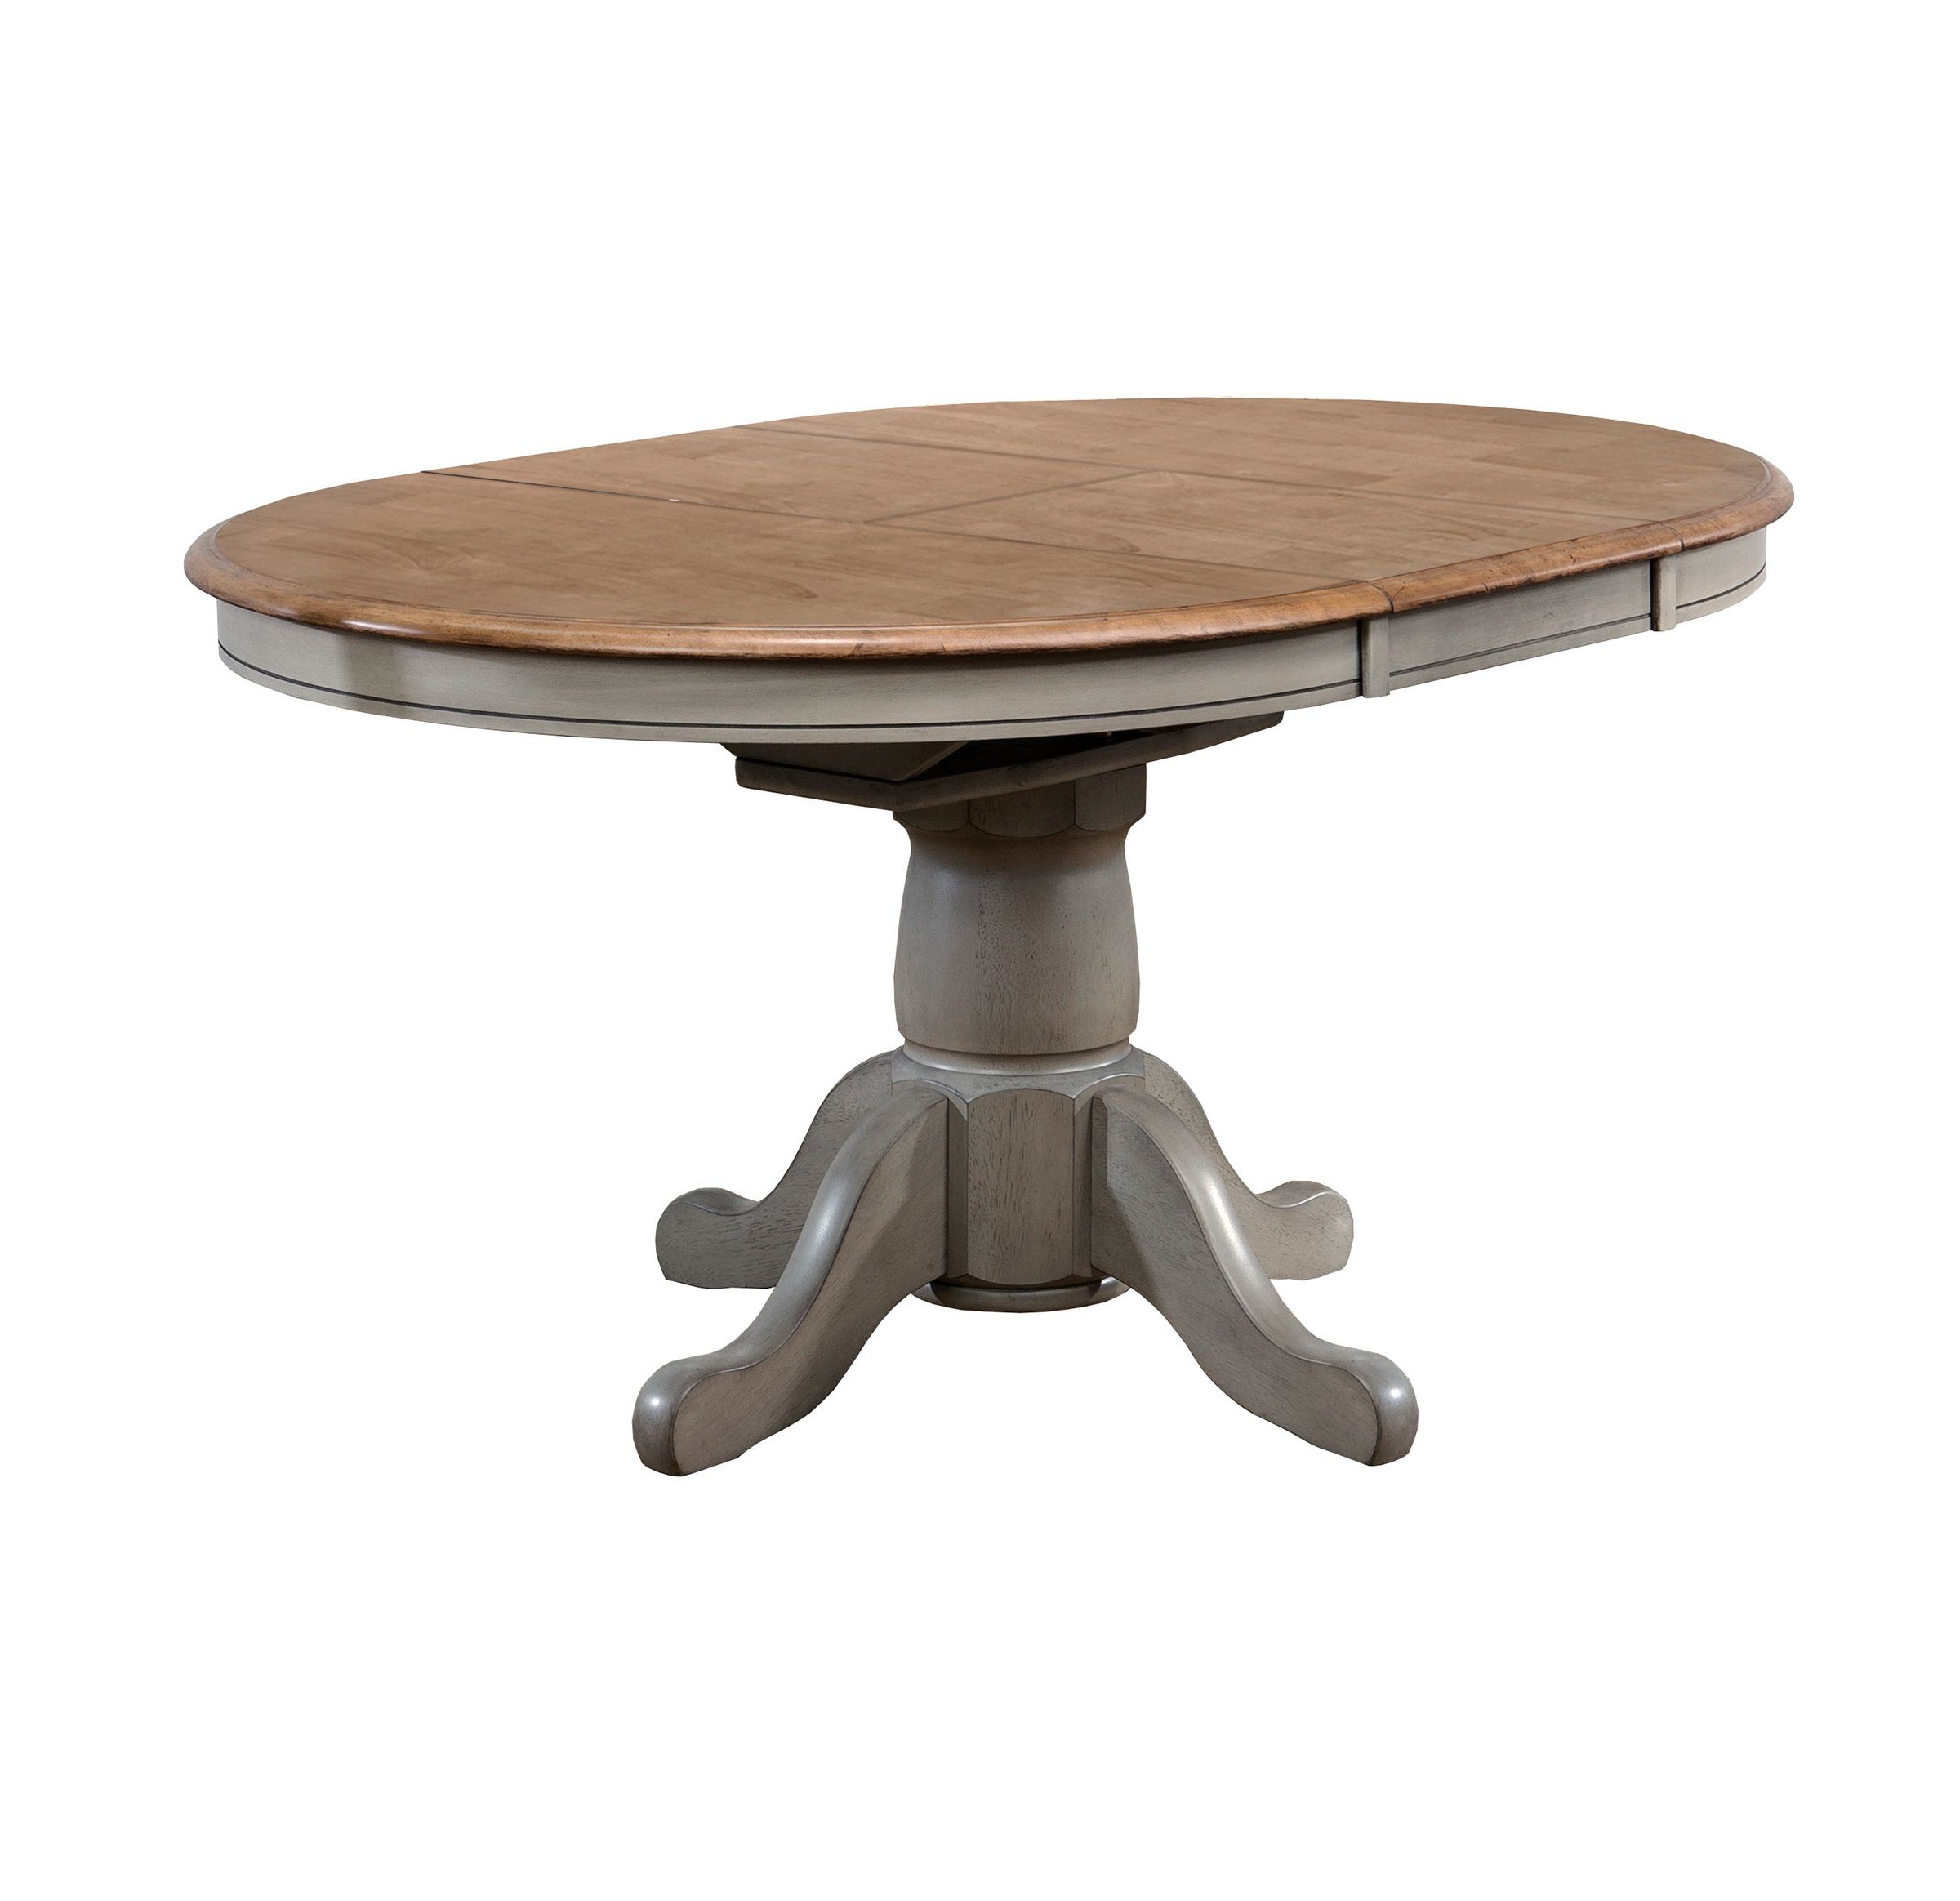 Barnwell Butterfly Leaf Pedestal Table Regarding Well Liked Warnock Butterfly Leaf Trestle Dining Tables (View 7 of 20)